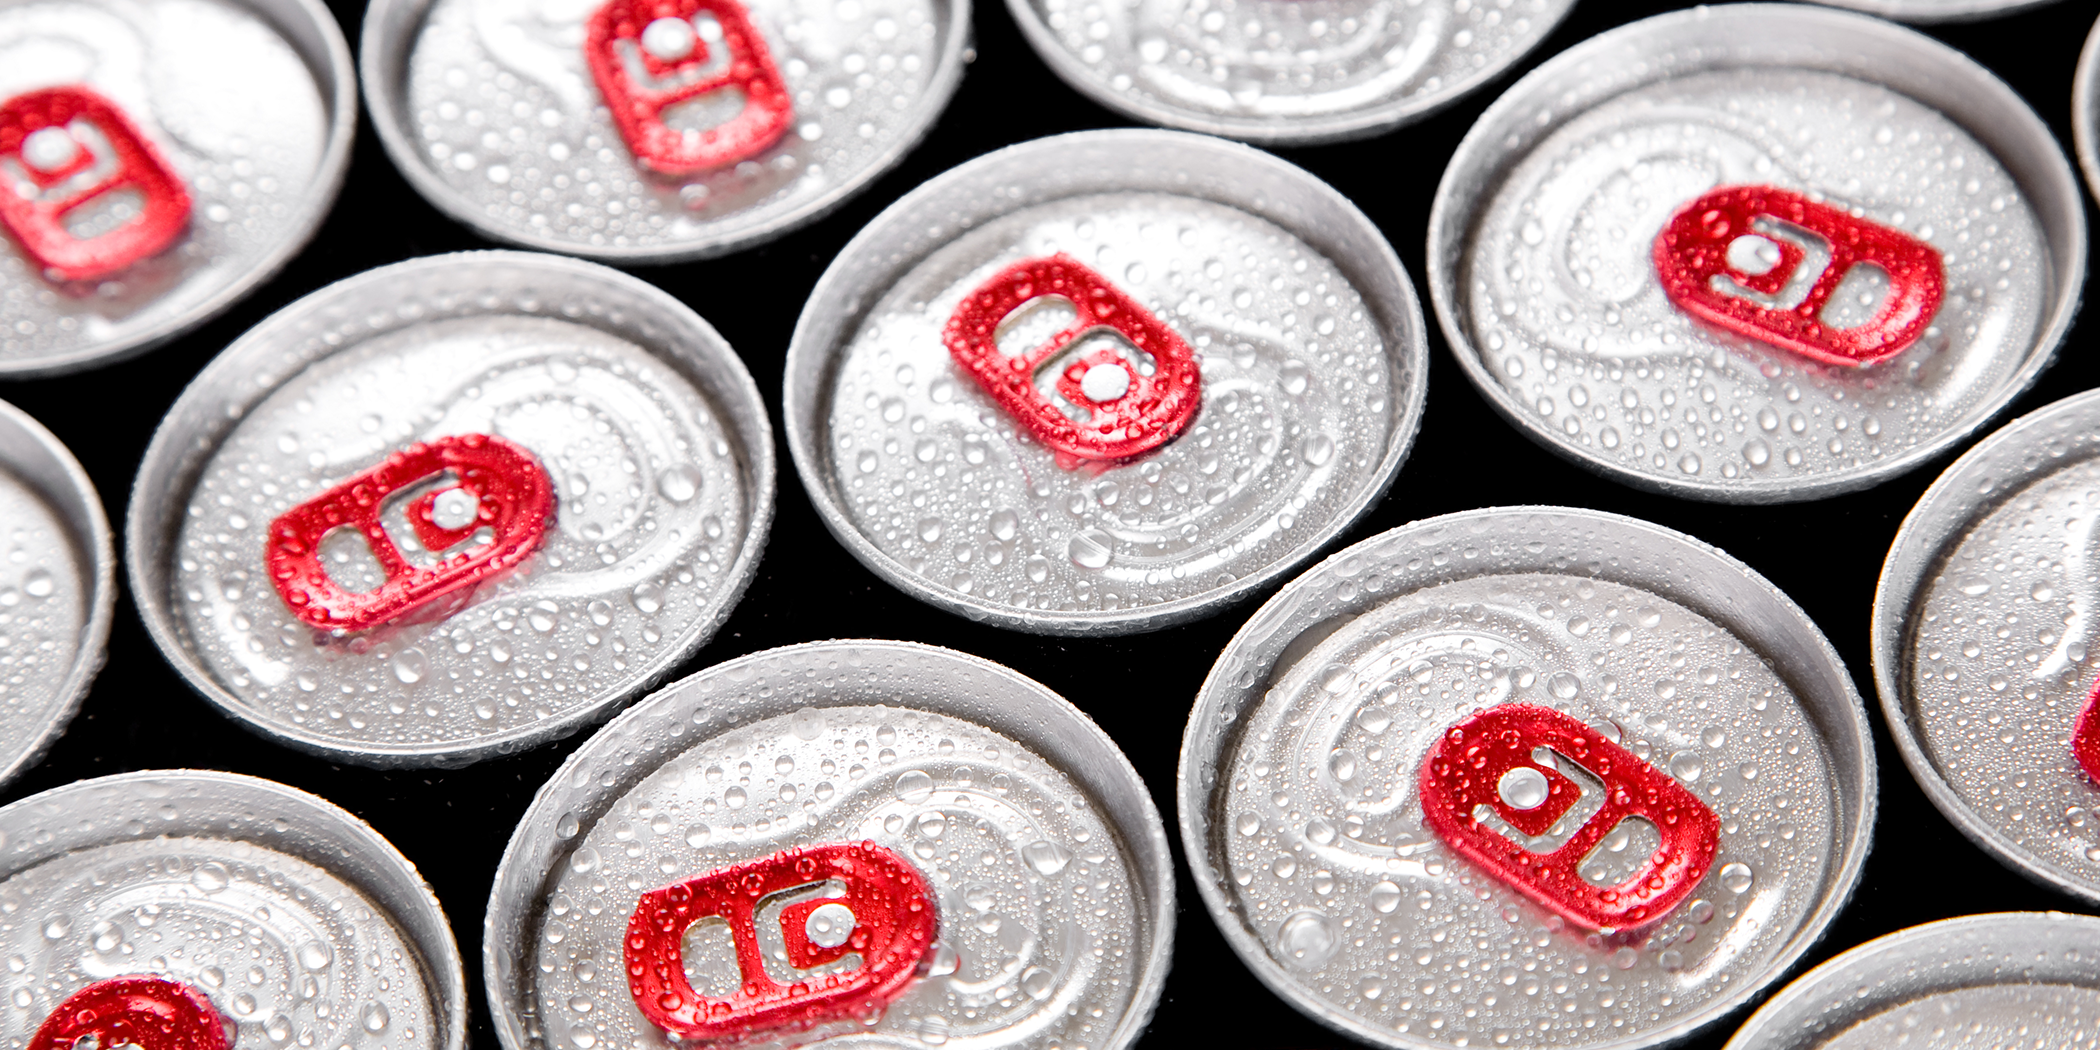 Are Energy Drinks Safe? Not By a Long Shot